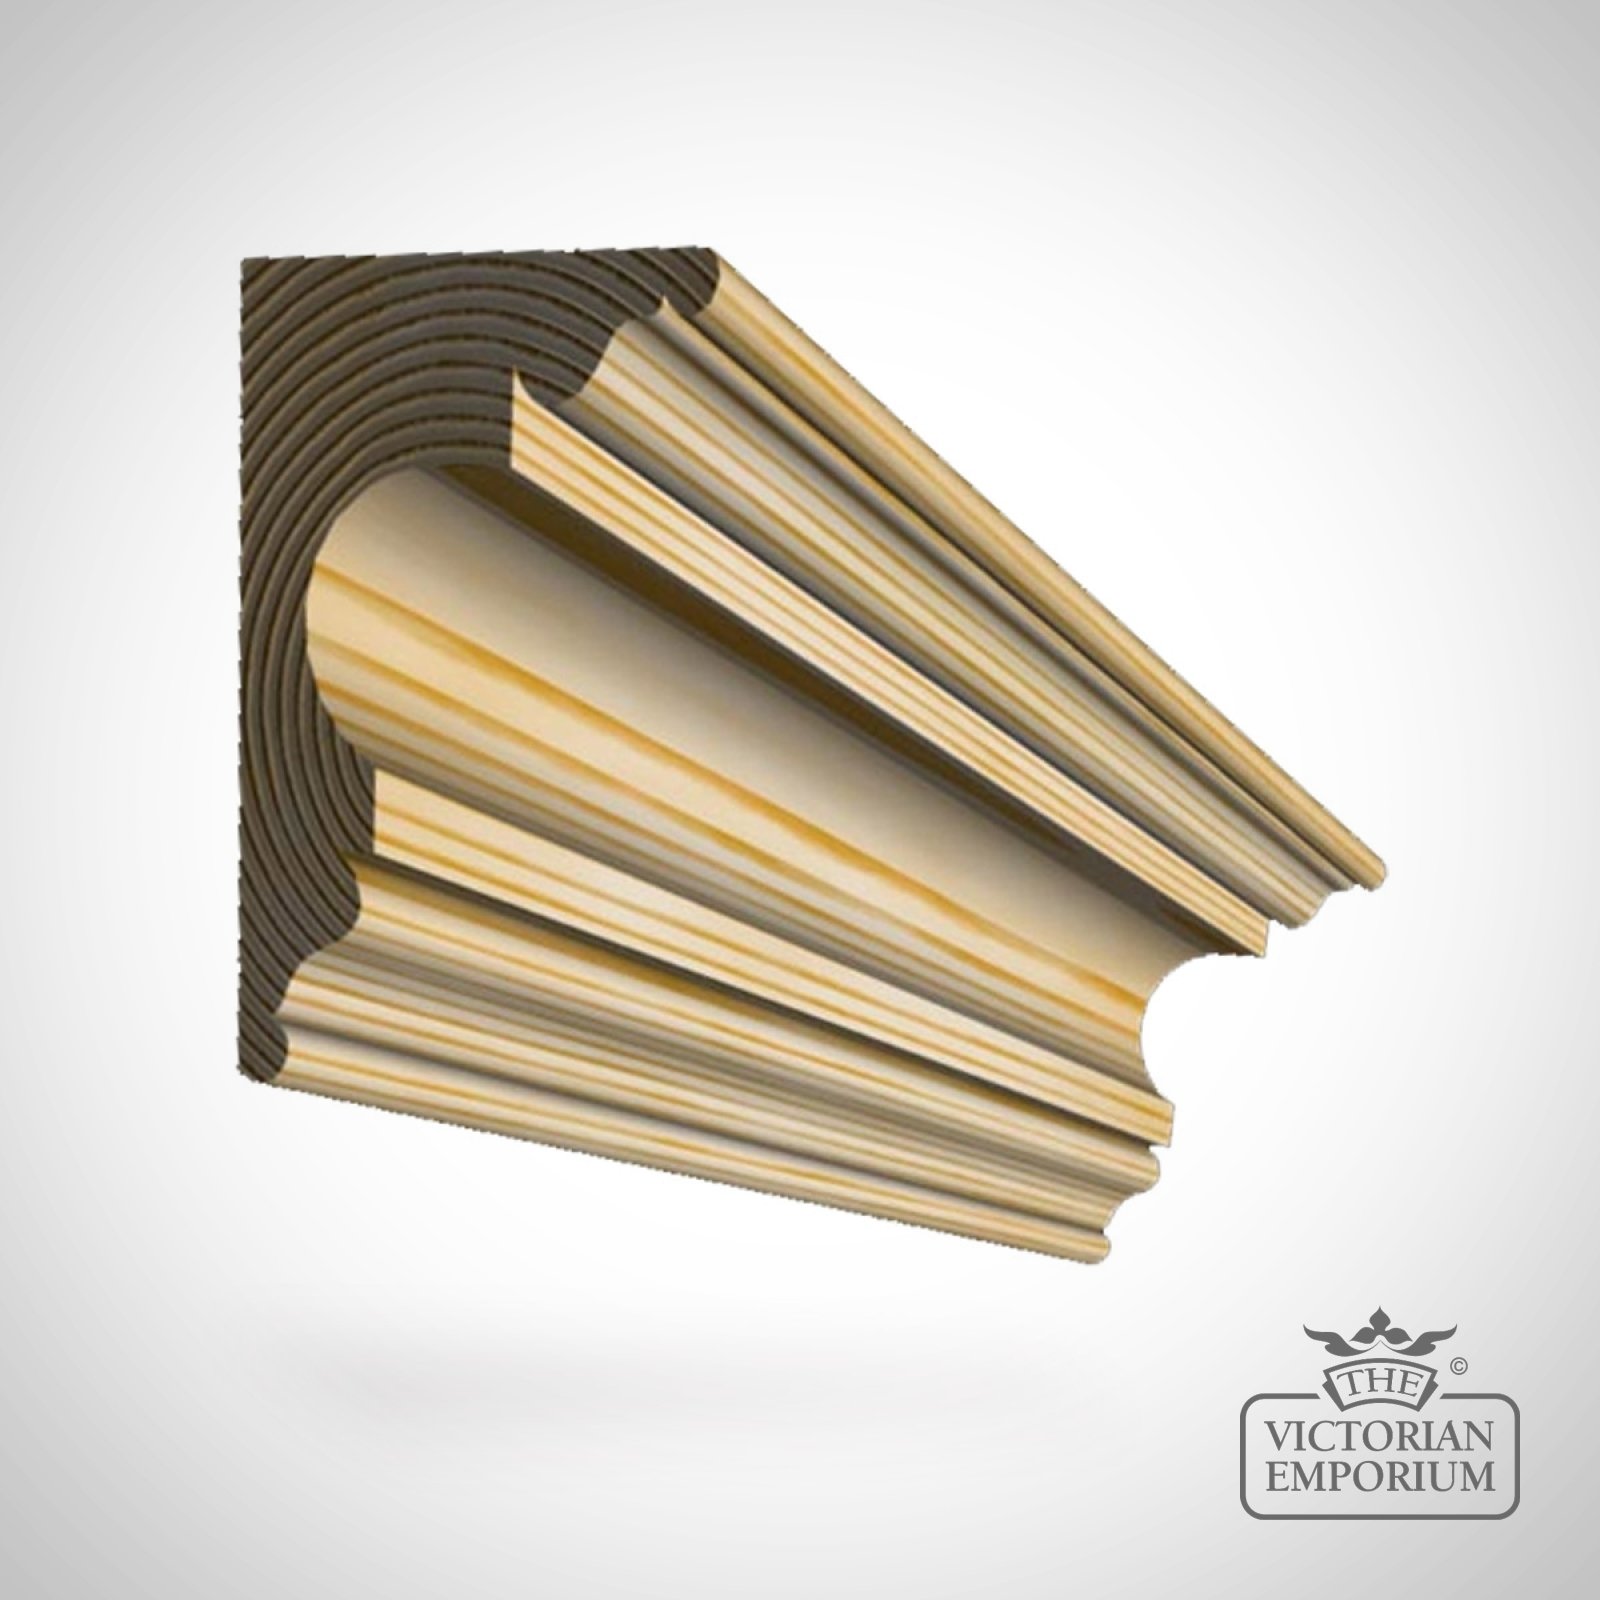 Wooden coving 89x61mm (sold in two pieces 89x21 / 44x21mm)